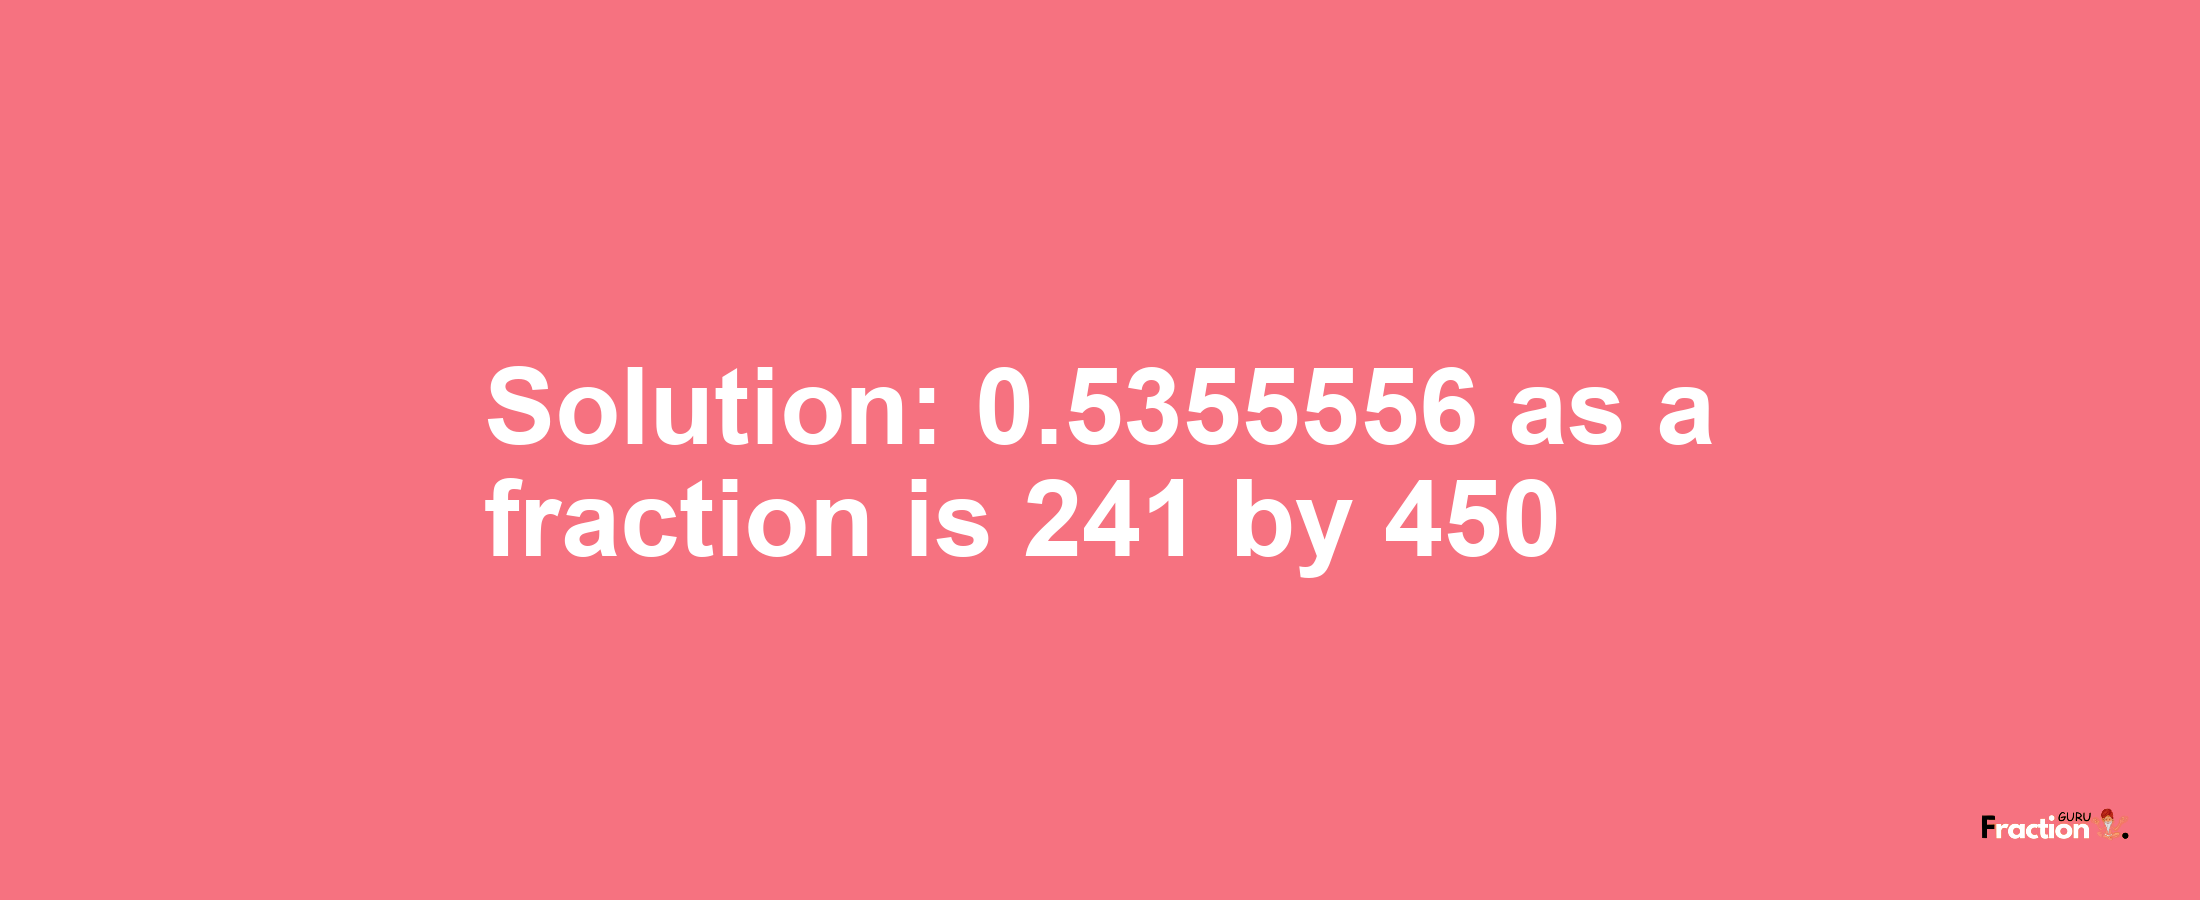 Solution:0.5355556 as a fraction is 241/450